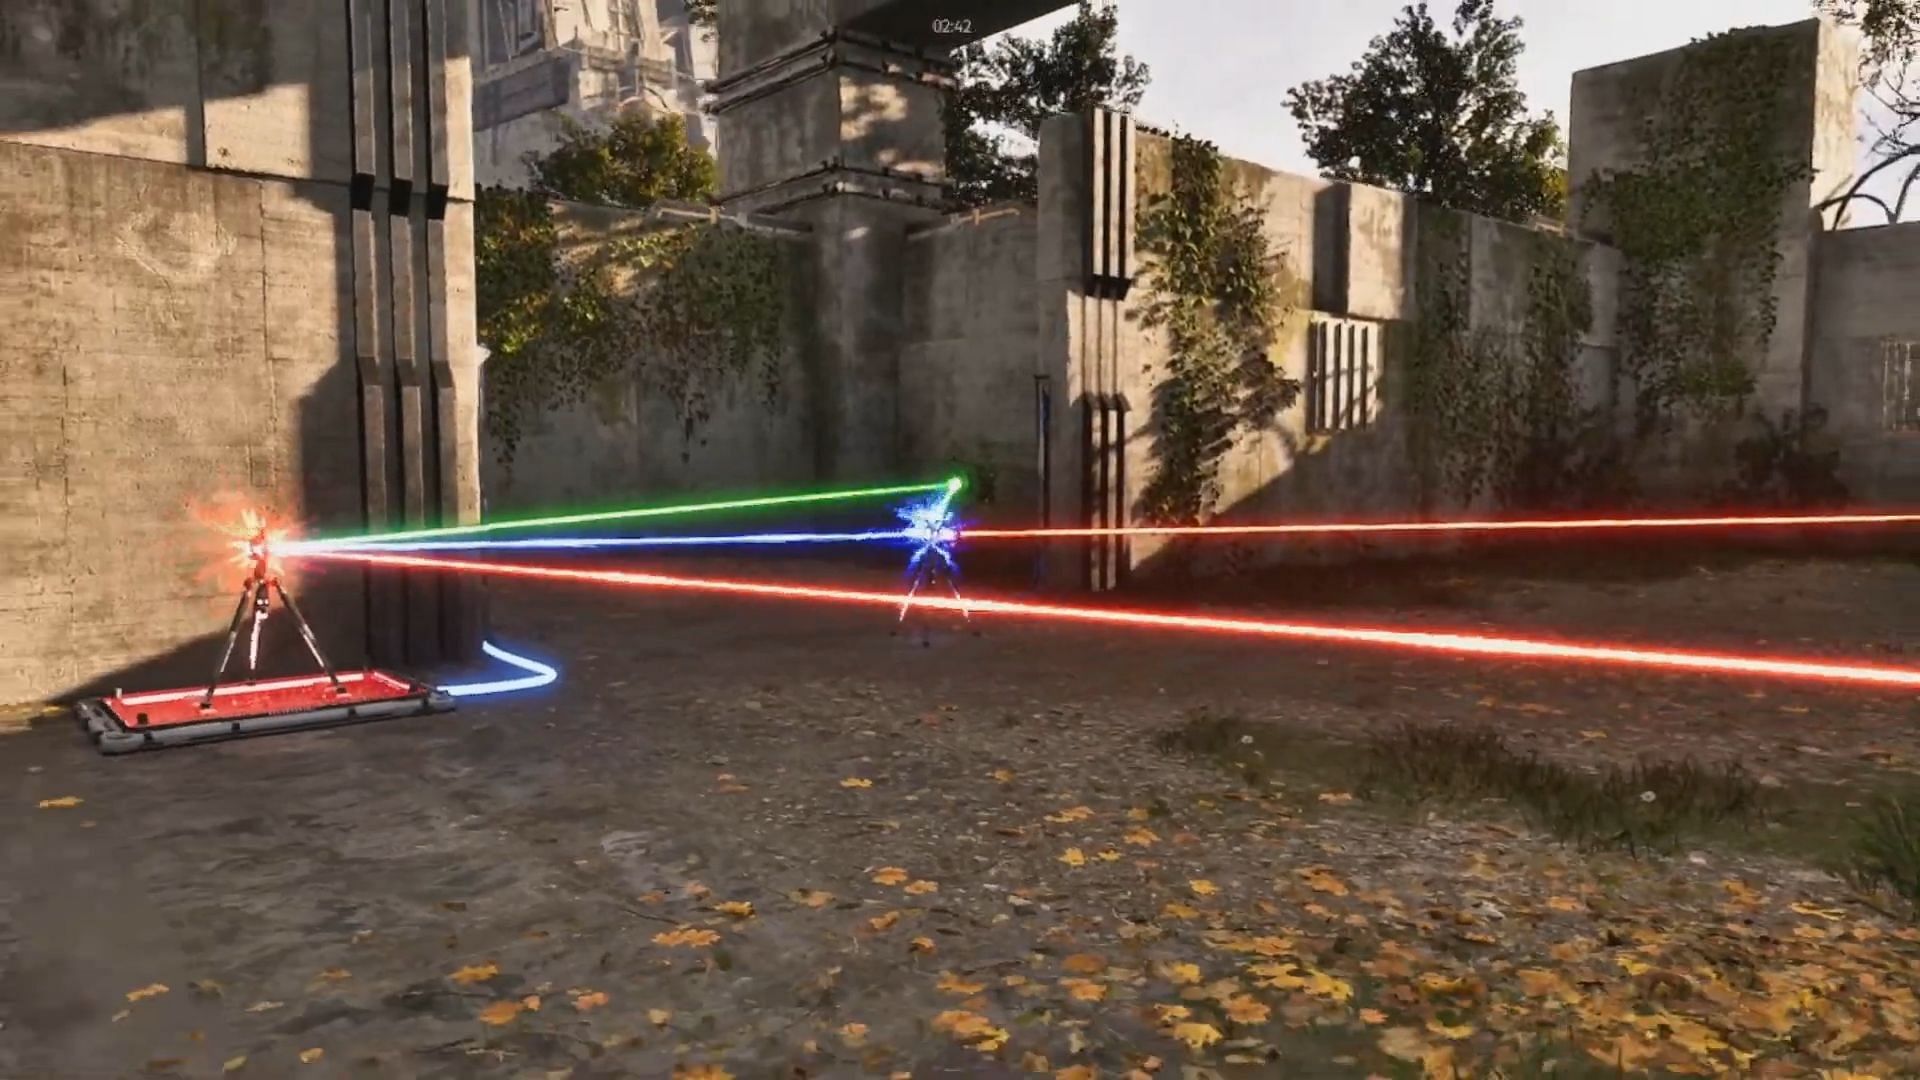 Once done properly, the laser flow will look like this. (Image via Devolver Digital)